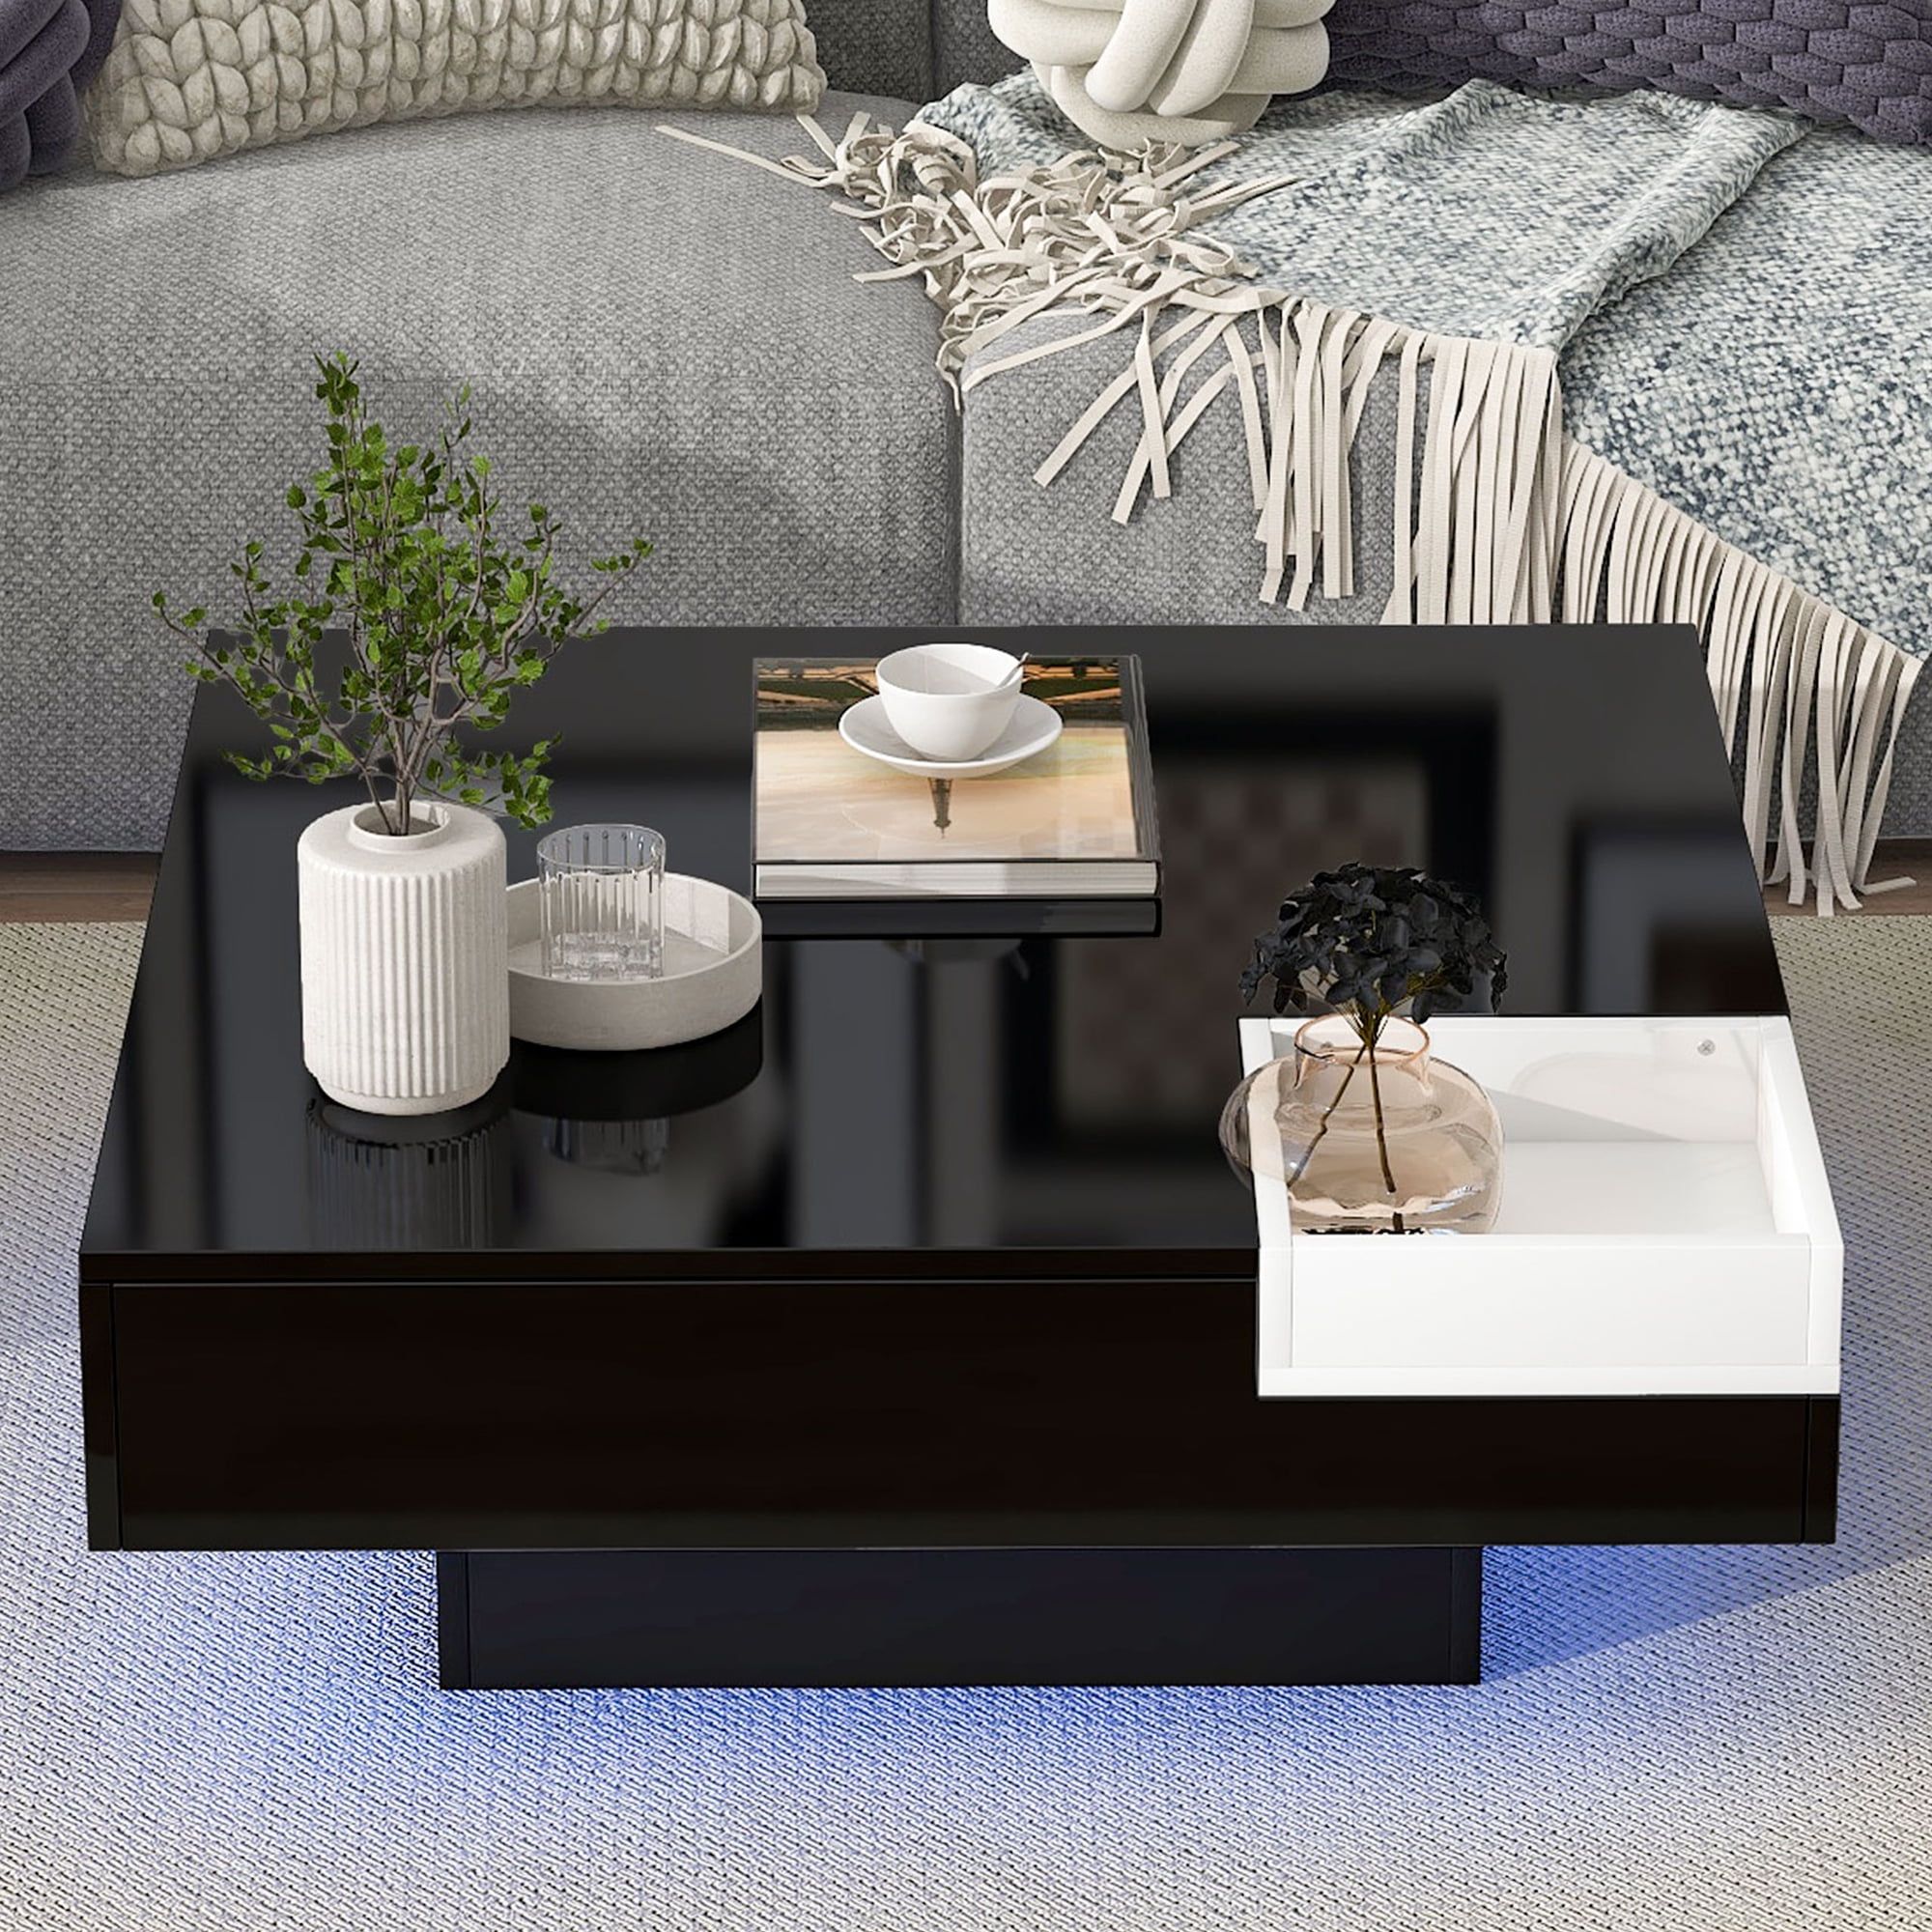 Hsunns Black Led Coffee Table With Detachable Tray, Modern High Glossy  Center Table, Square Cocktail Table, Wooden Living Room Table With 16  Colors Led Lights, Contemporary Living Room Furniture – Walmart Intended For Detachable Tray Coffee Tables (View 3 of 15)